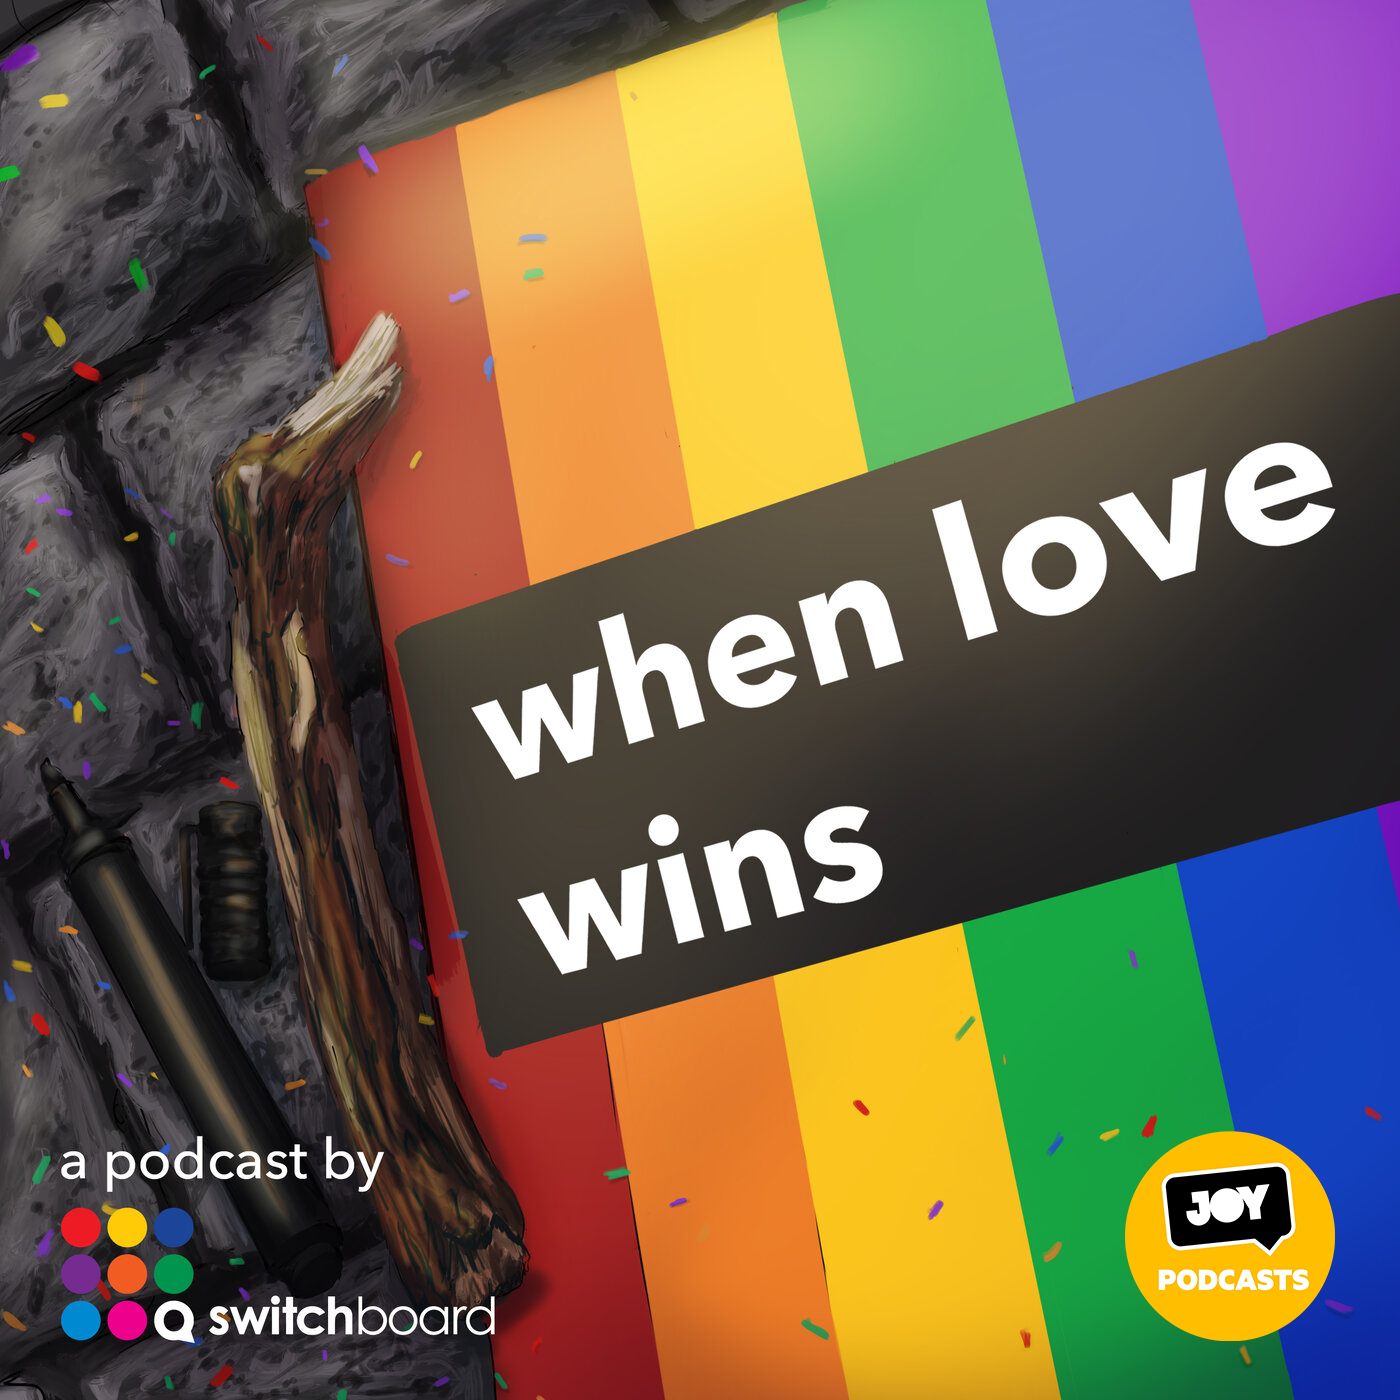 When Love Wins a podcast by Switchboard